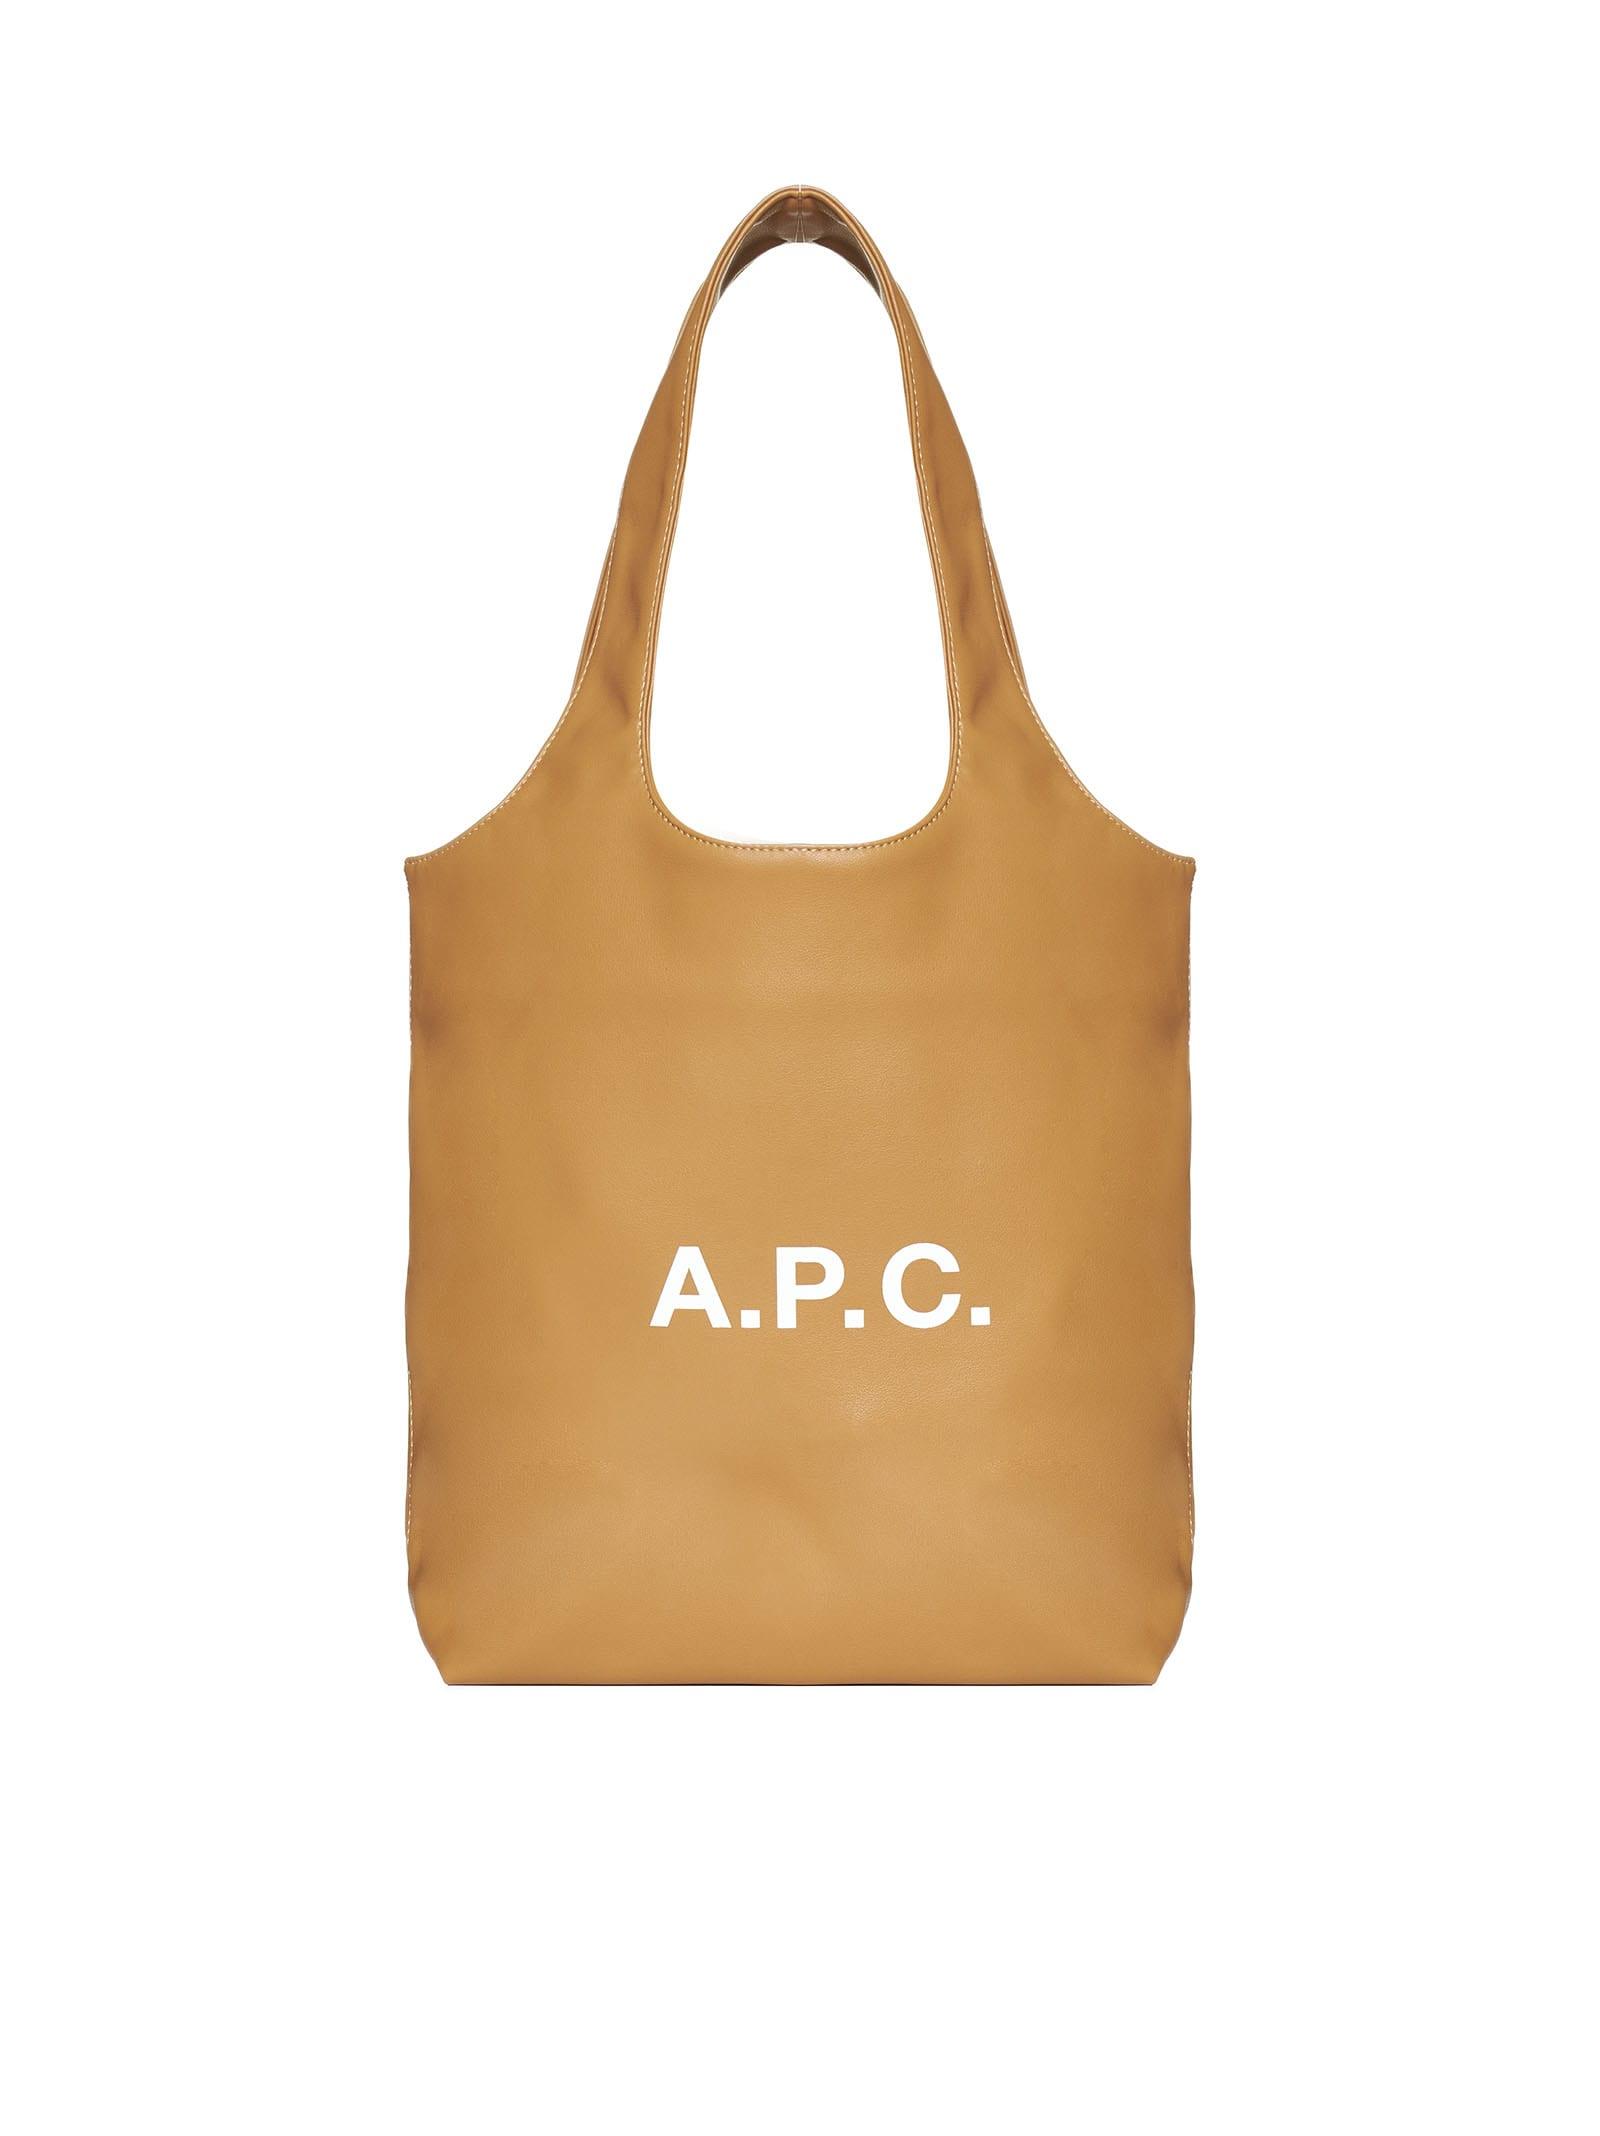 A.P.C. Ninon Vegan Leather Small Tote Bag in Natural | Lyst